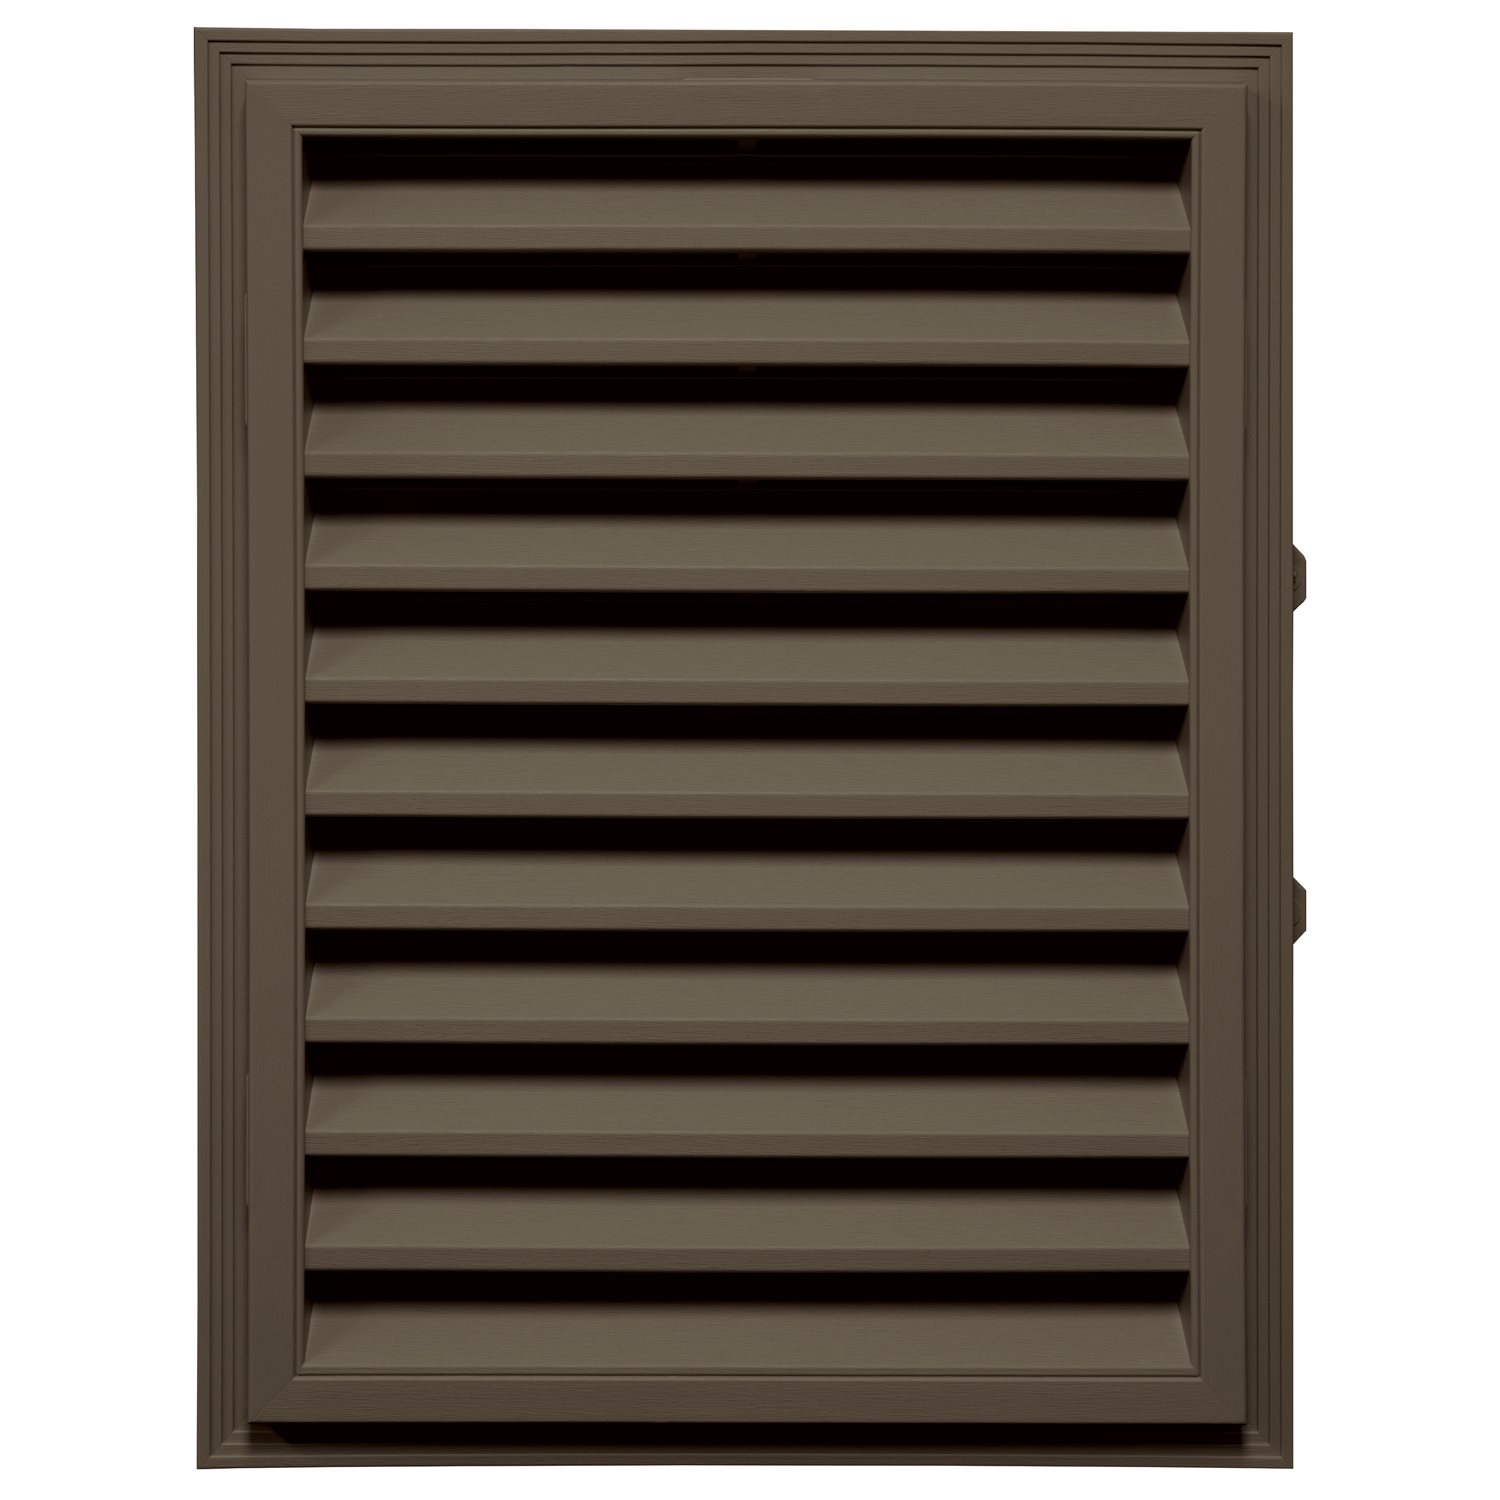 18in. x 24in. - 357 Canyon Brown